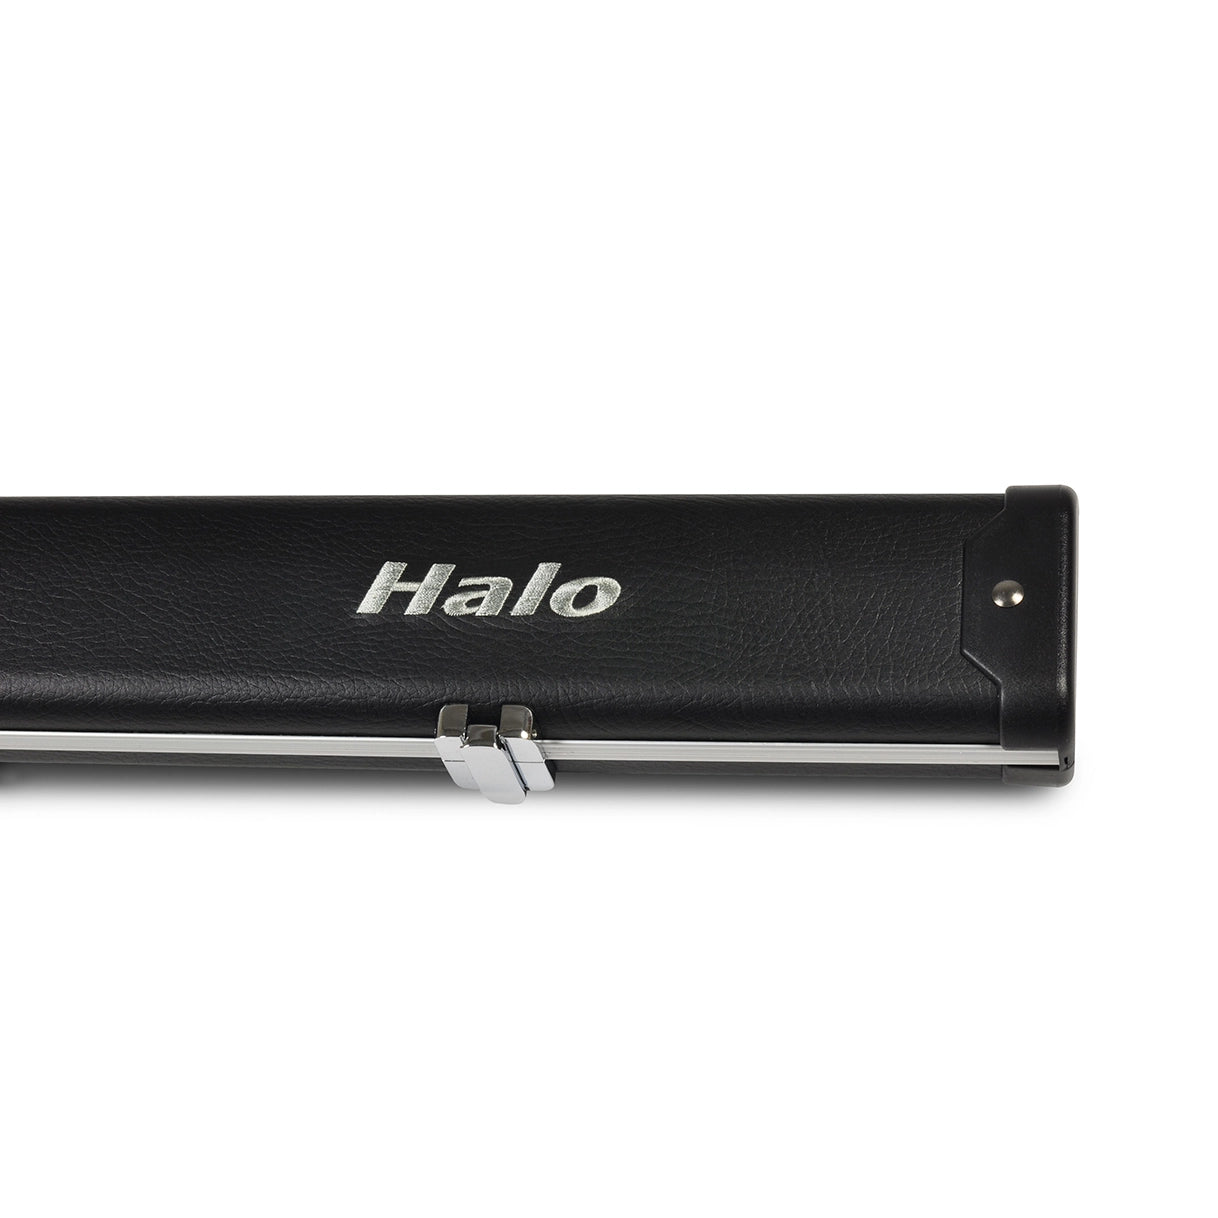 Peradon Black Halo Case for 3/4 Jointed Cue. End cap view